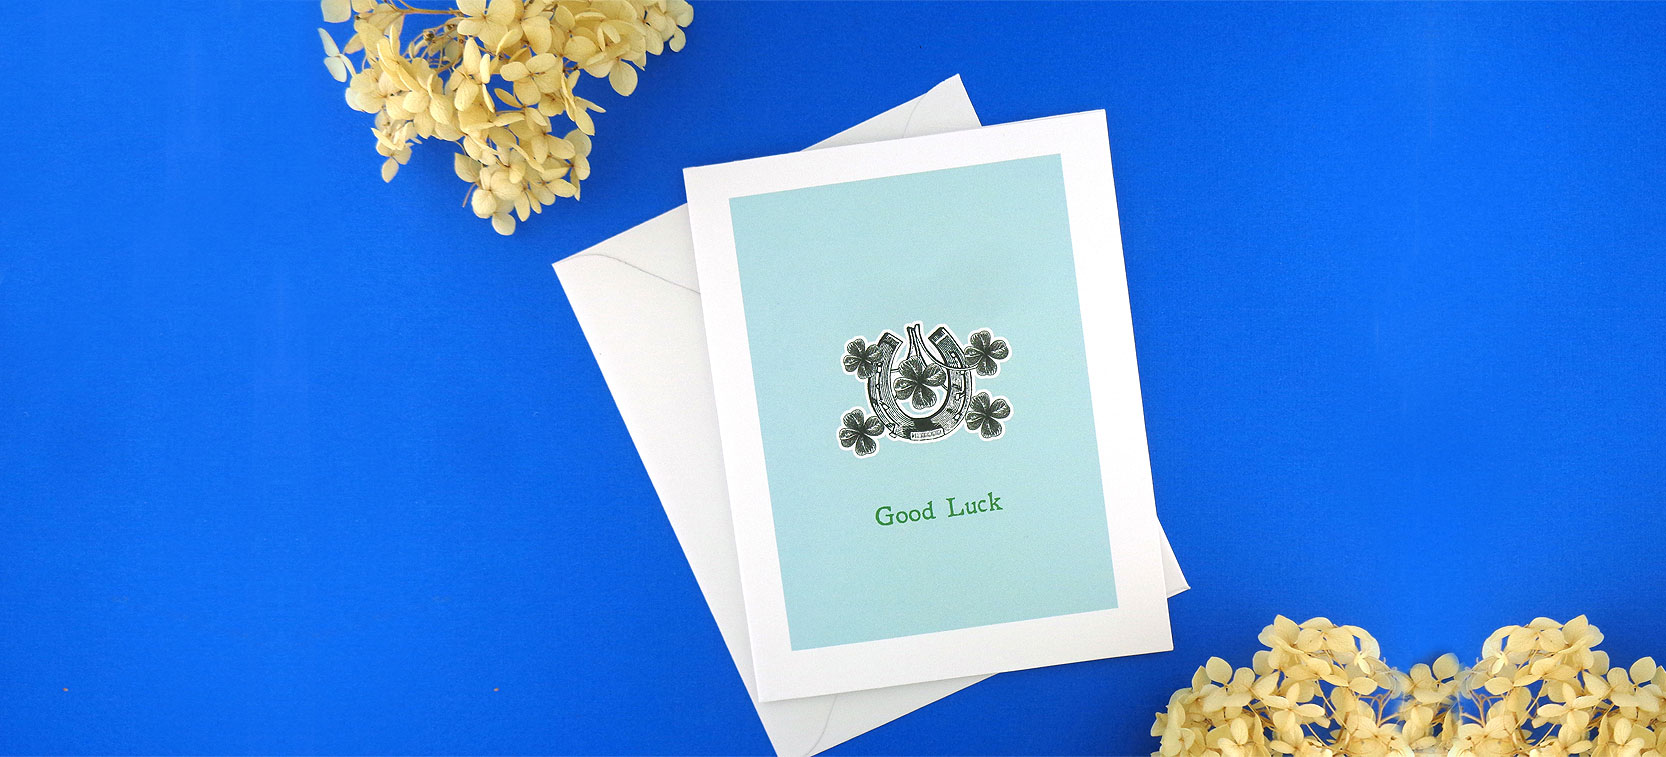 LAVISHY design and wholesale good luck themed vegan accessories and gfits to gift shops, boutiques and book stores in Canada, USA and worldwide.